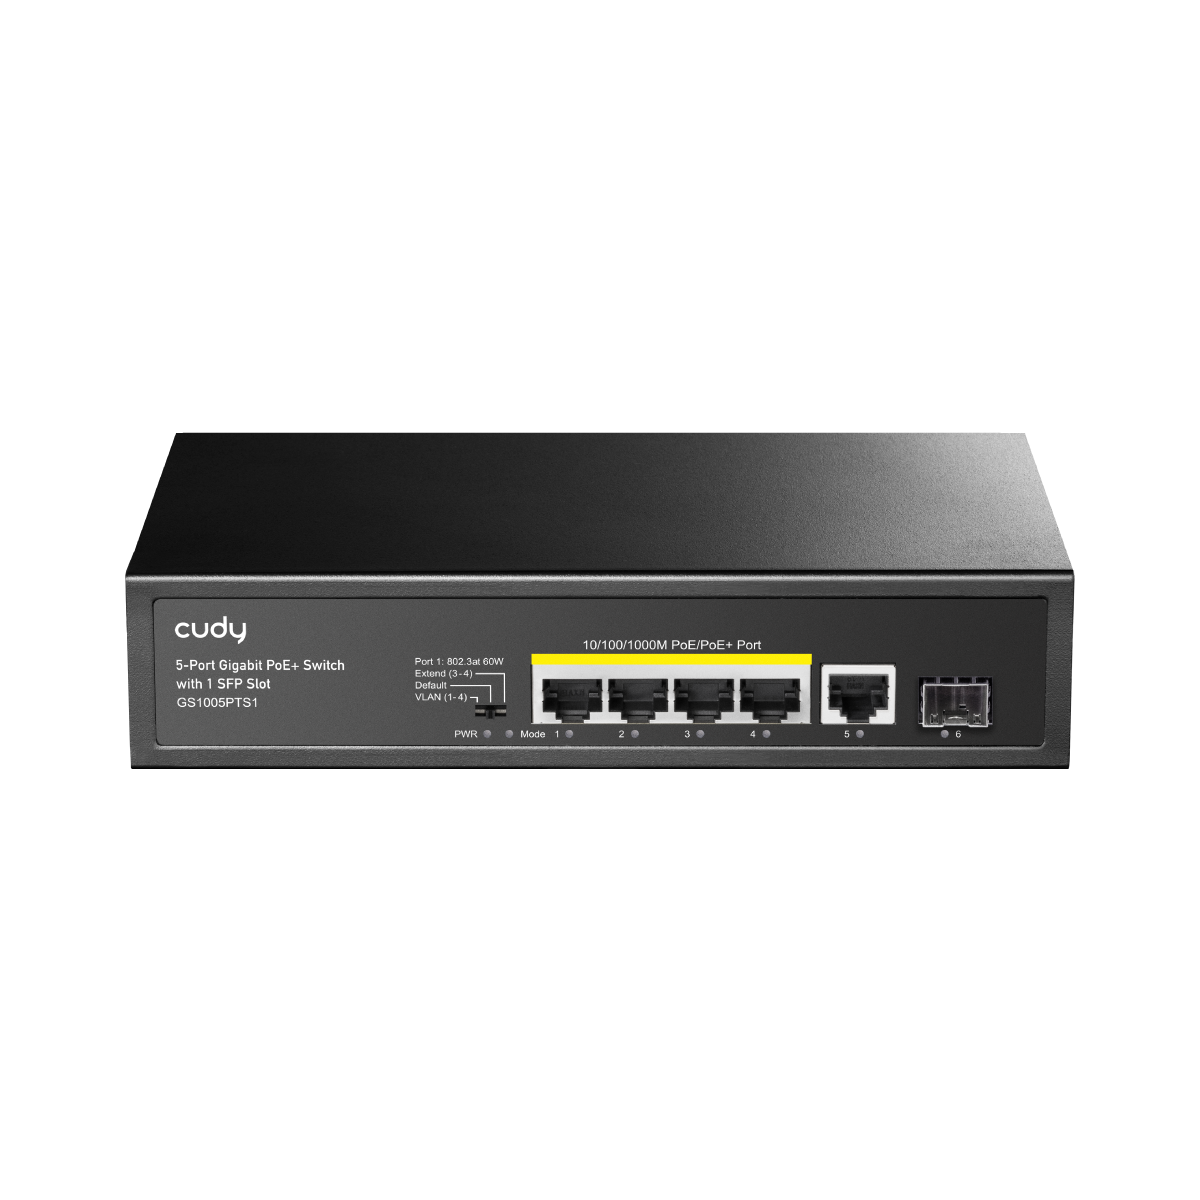 Cudy 5-Port Gigabit PoE+ Switch with 1 SFP Slot (GS1005PTS1)